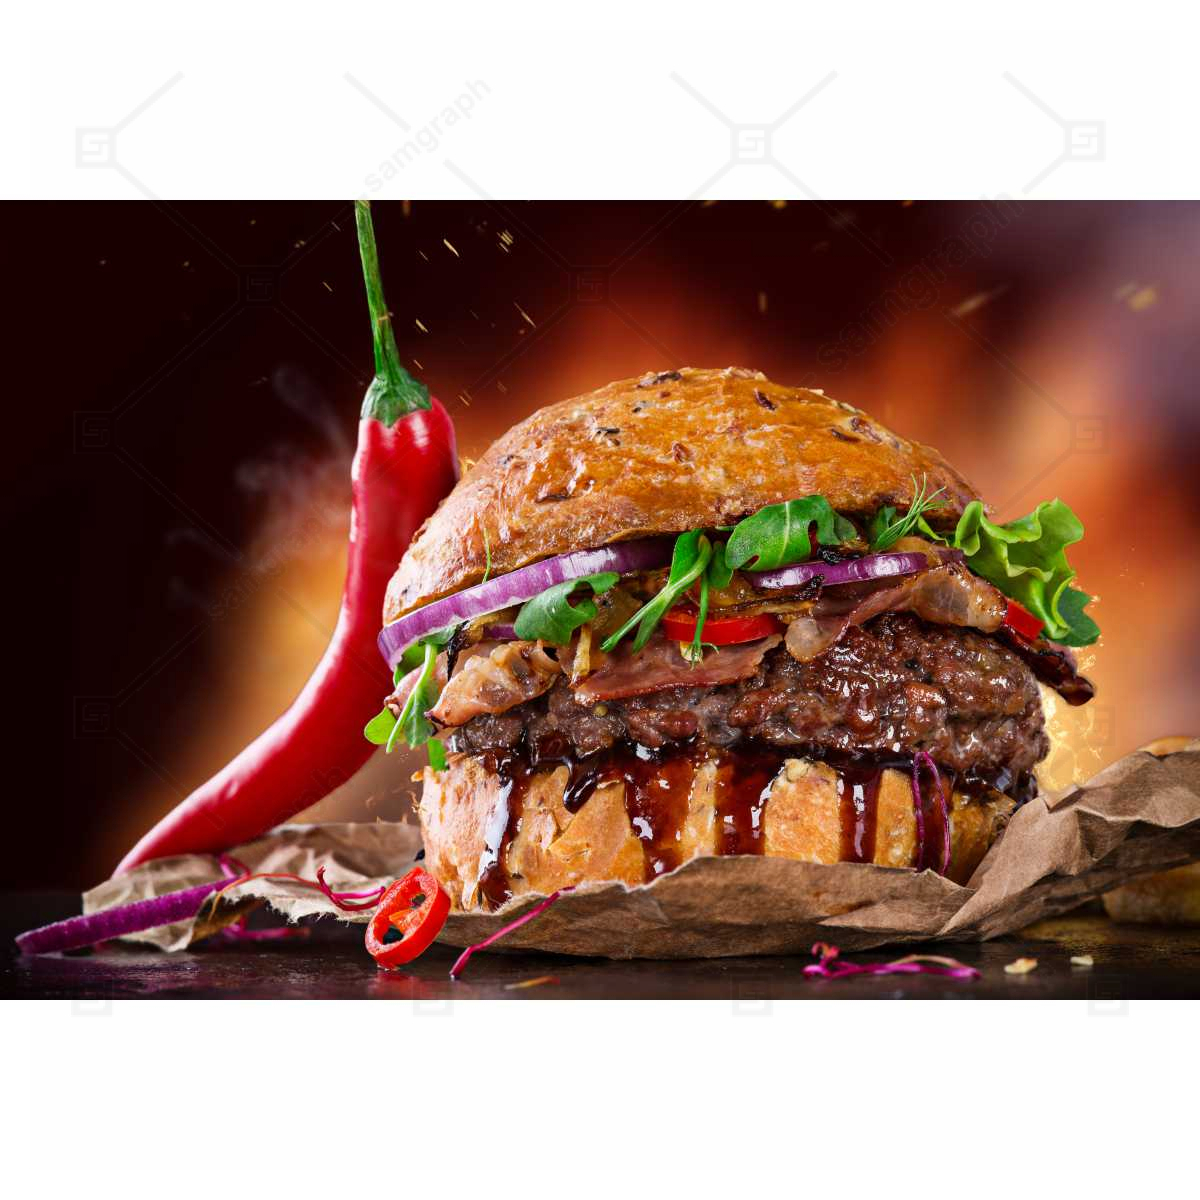 High quality photo of juicy hamburger with fire and pepper lettuce onion parsley 1 پس زمینه کاغذ خراشیده با بافت